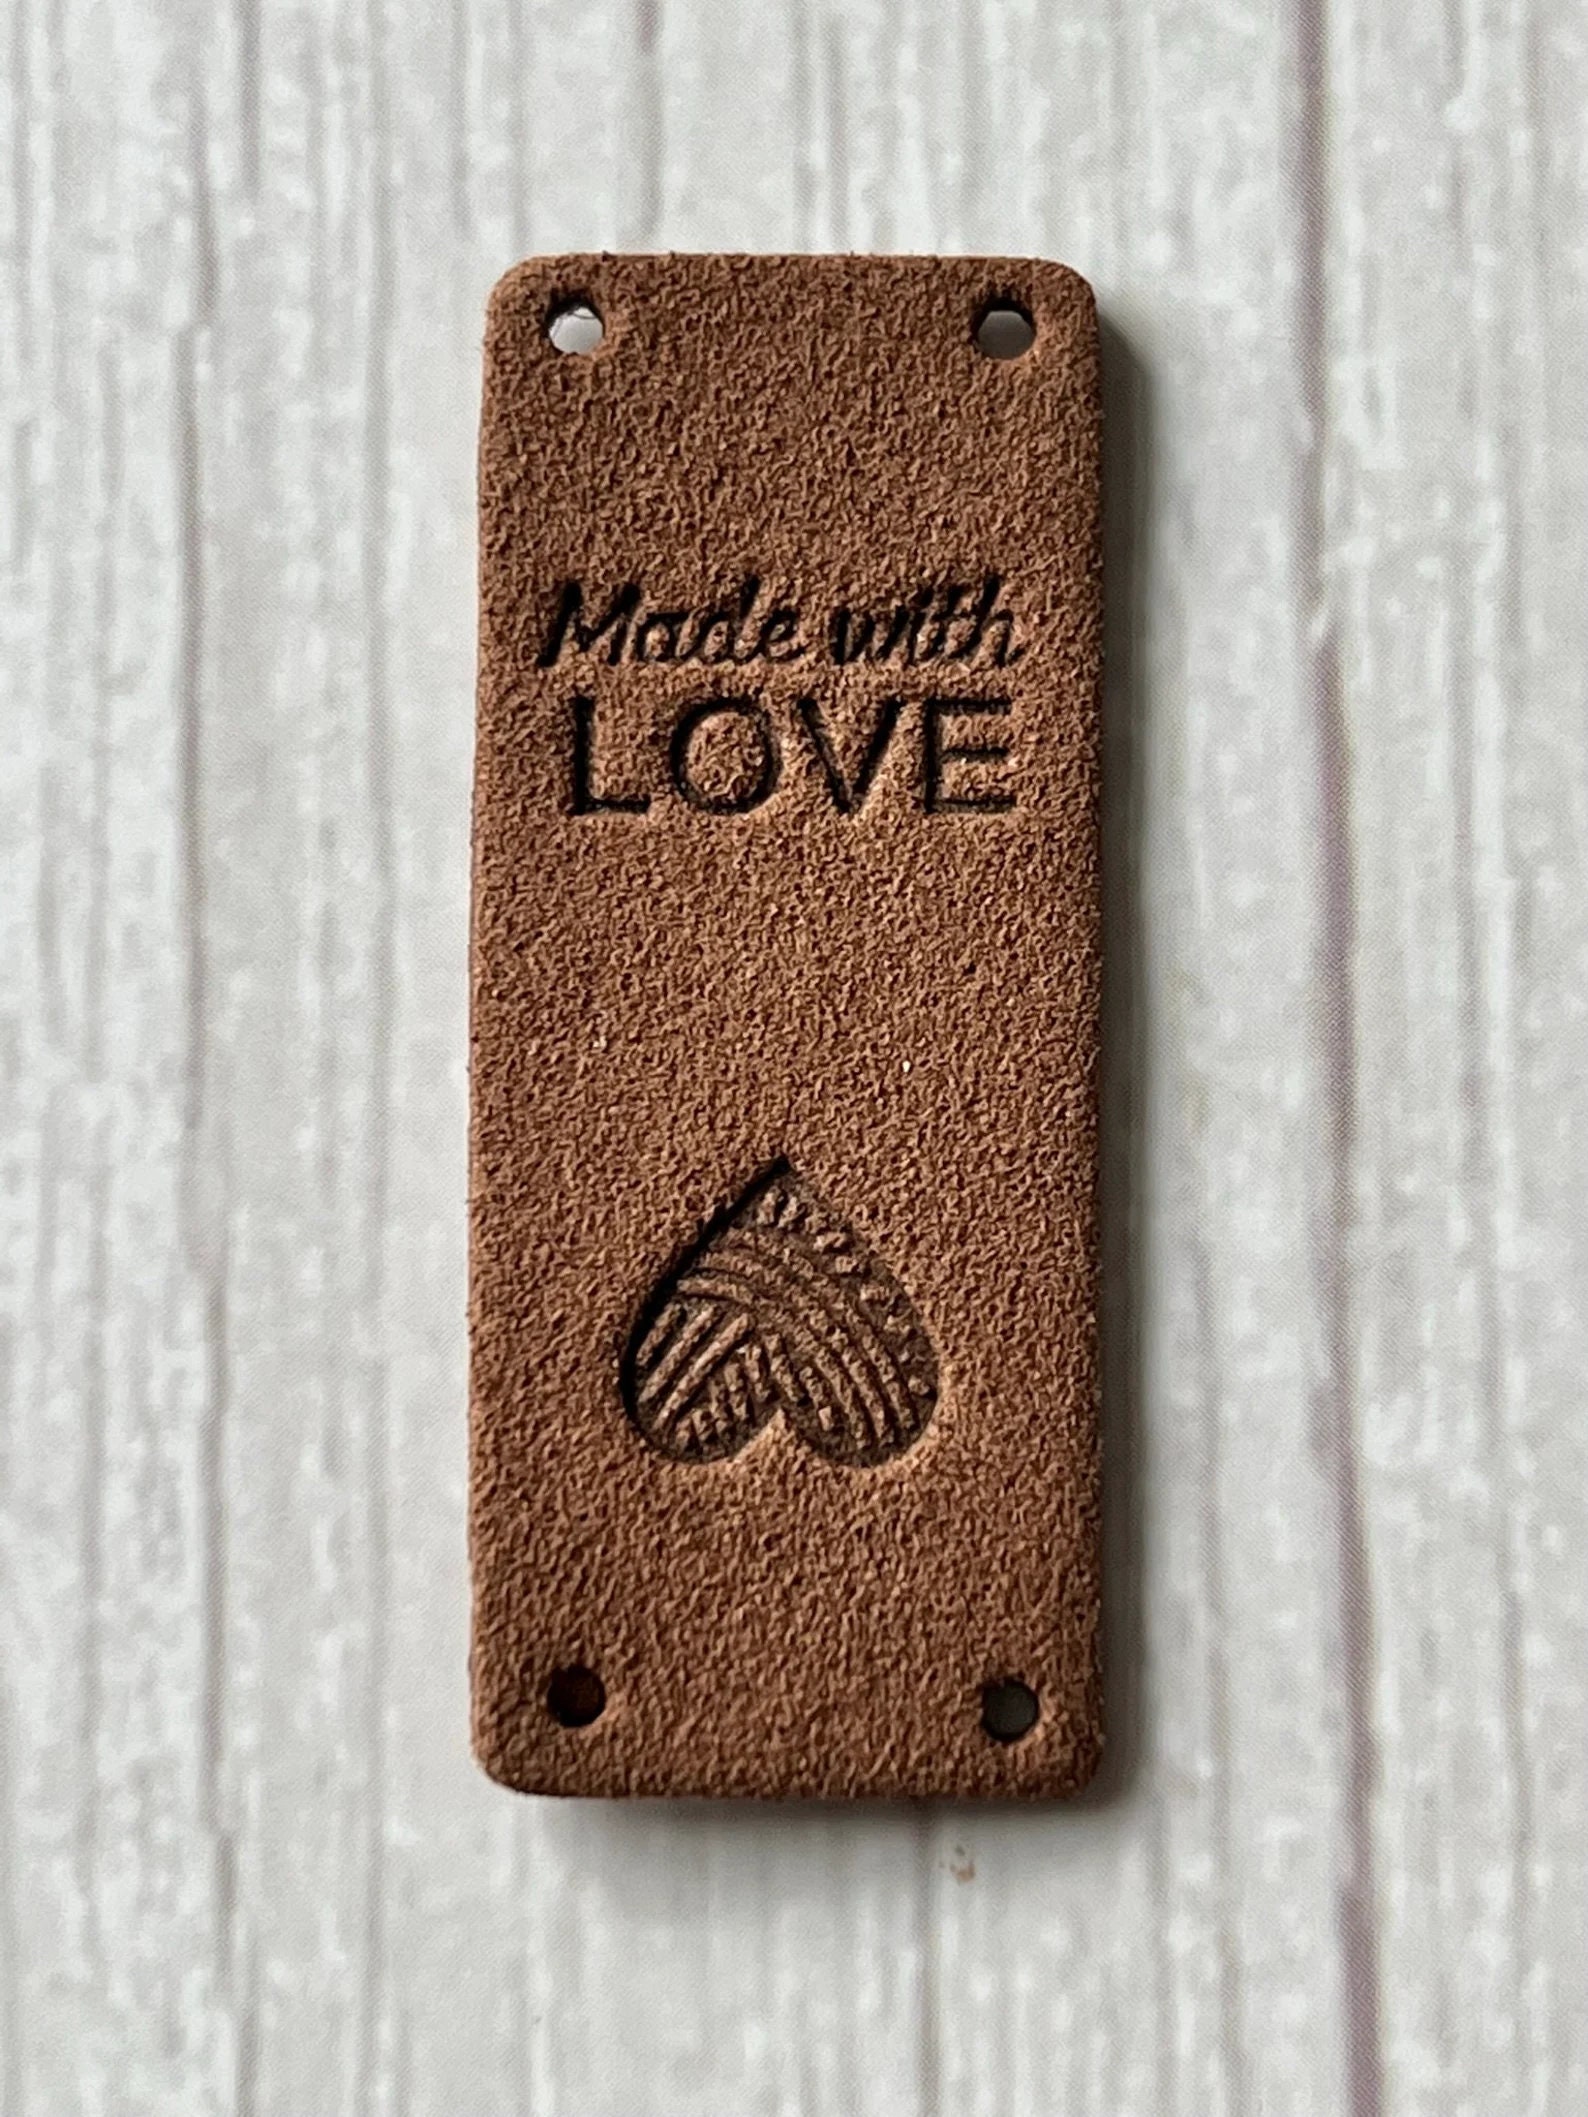 Personalized Microfiber Made-with-Love Suede Tags –